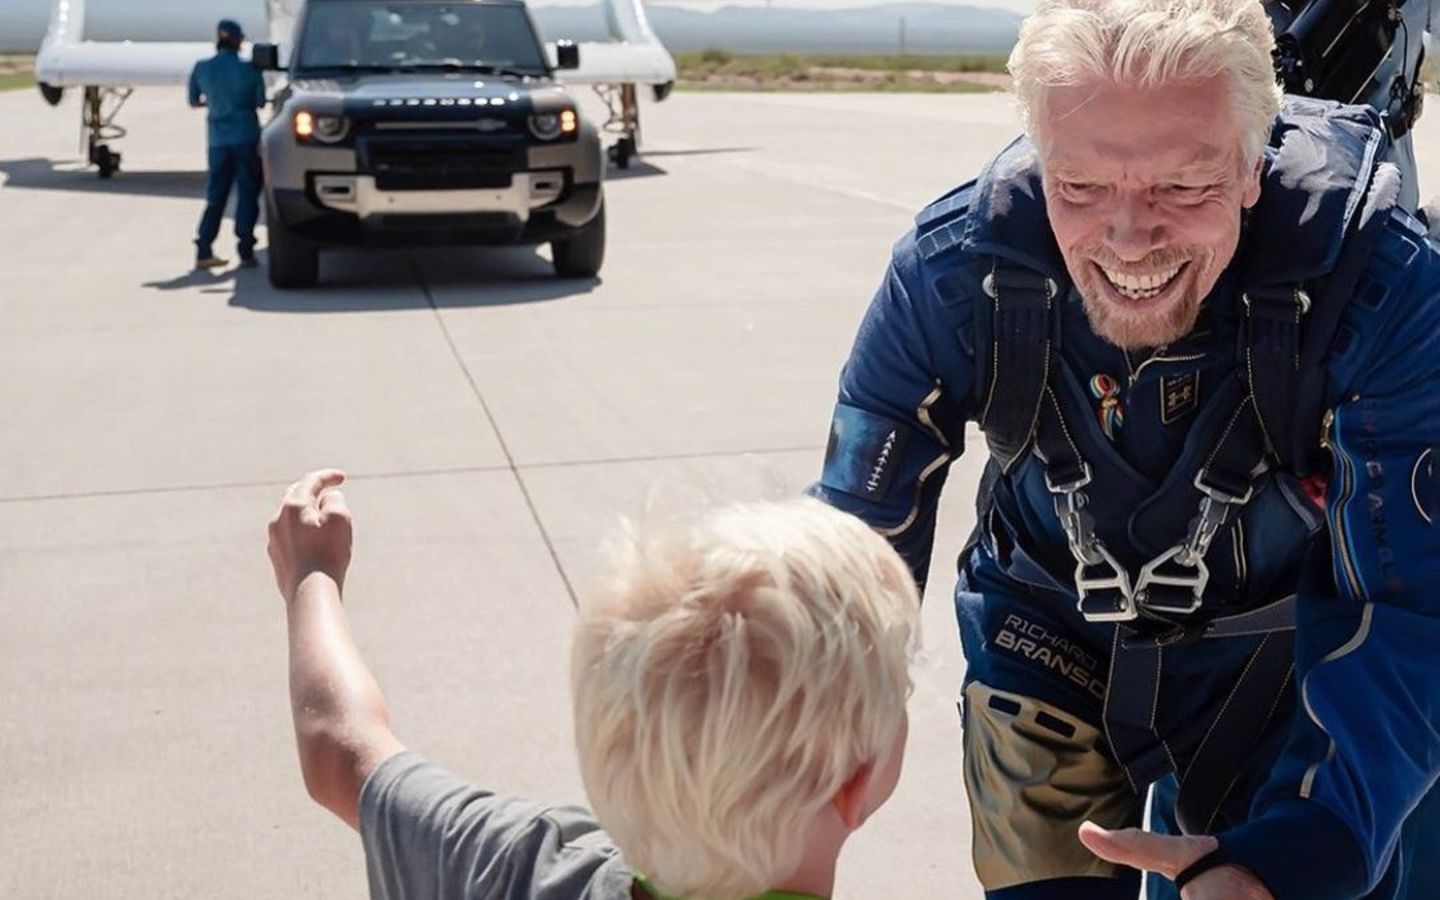 Richard Branson runs to hug his grandson, Artie, after flying to space with Virgi Galactic